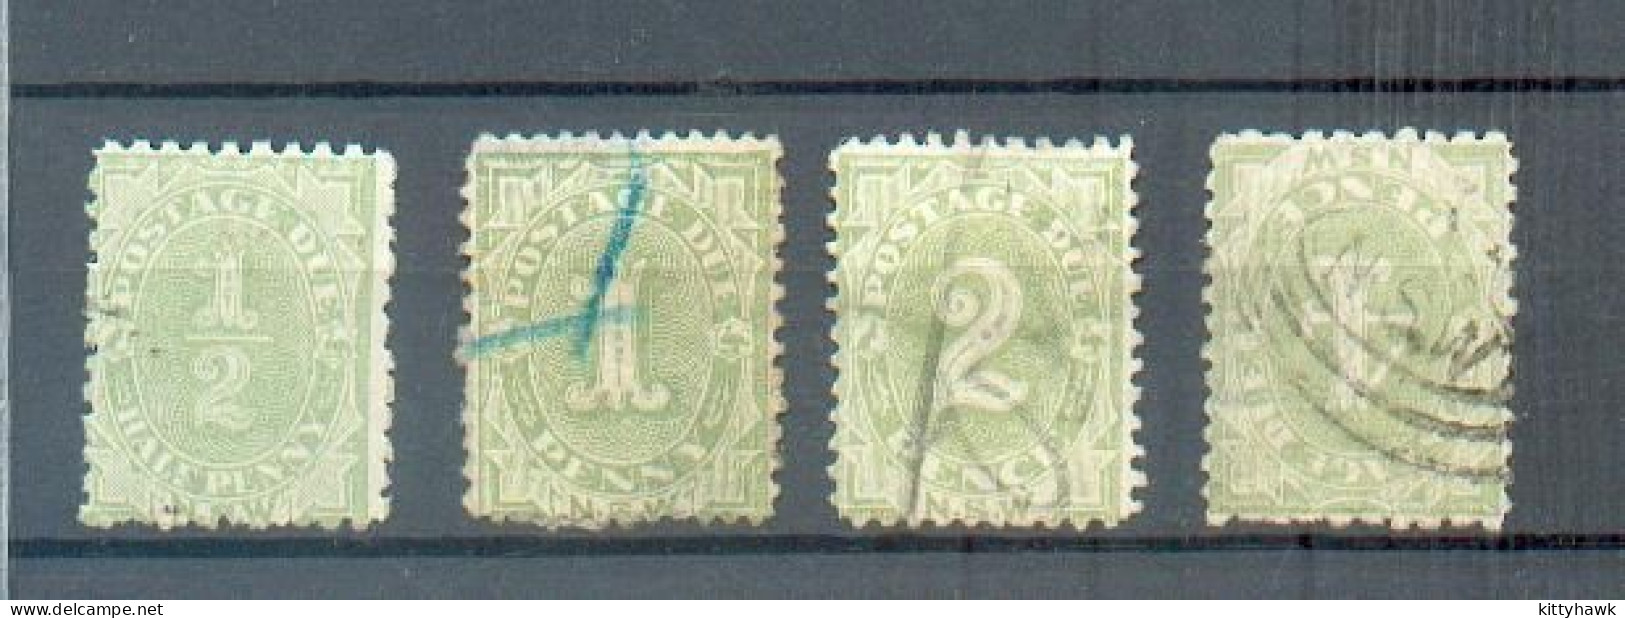 B 237 - N. S. W. - YT Taxe 1-2-3-5 ° Obli - Used Stamps